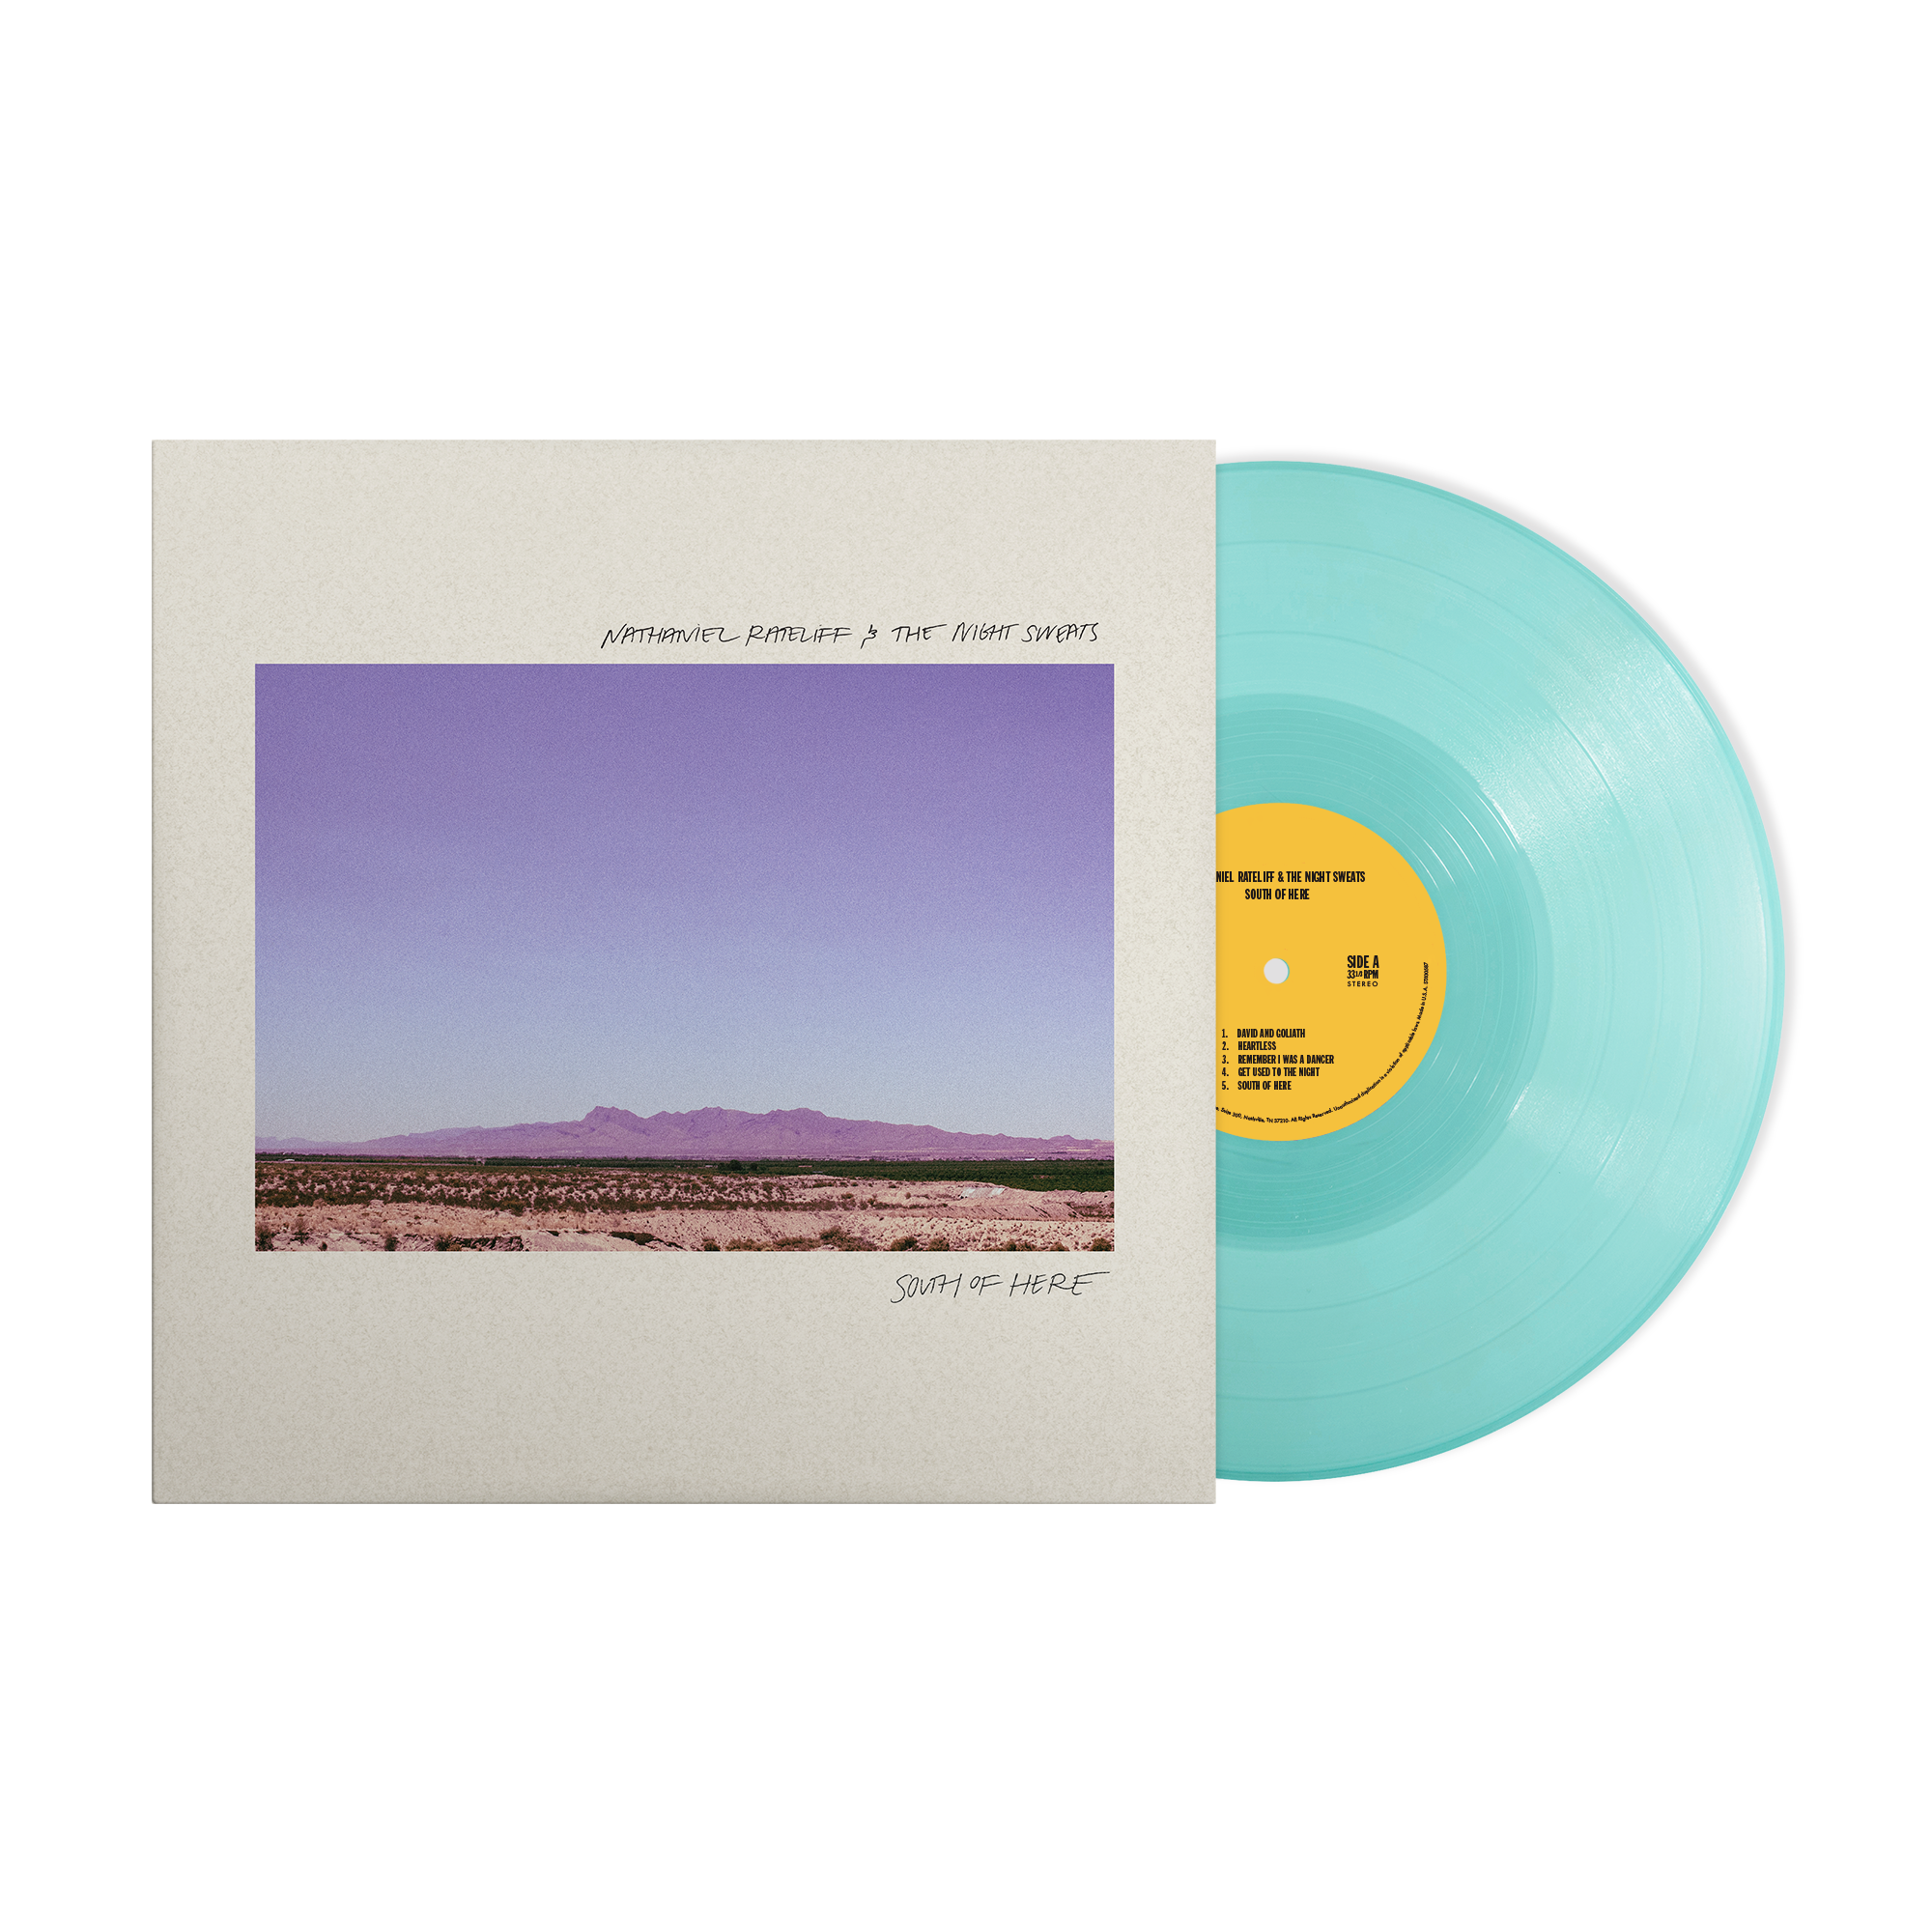 South of Here: Limited Turquoise Vinyl LP